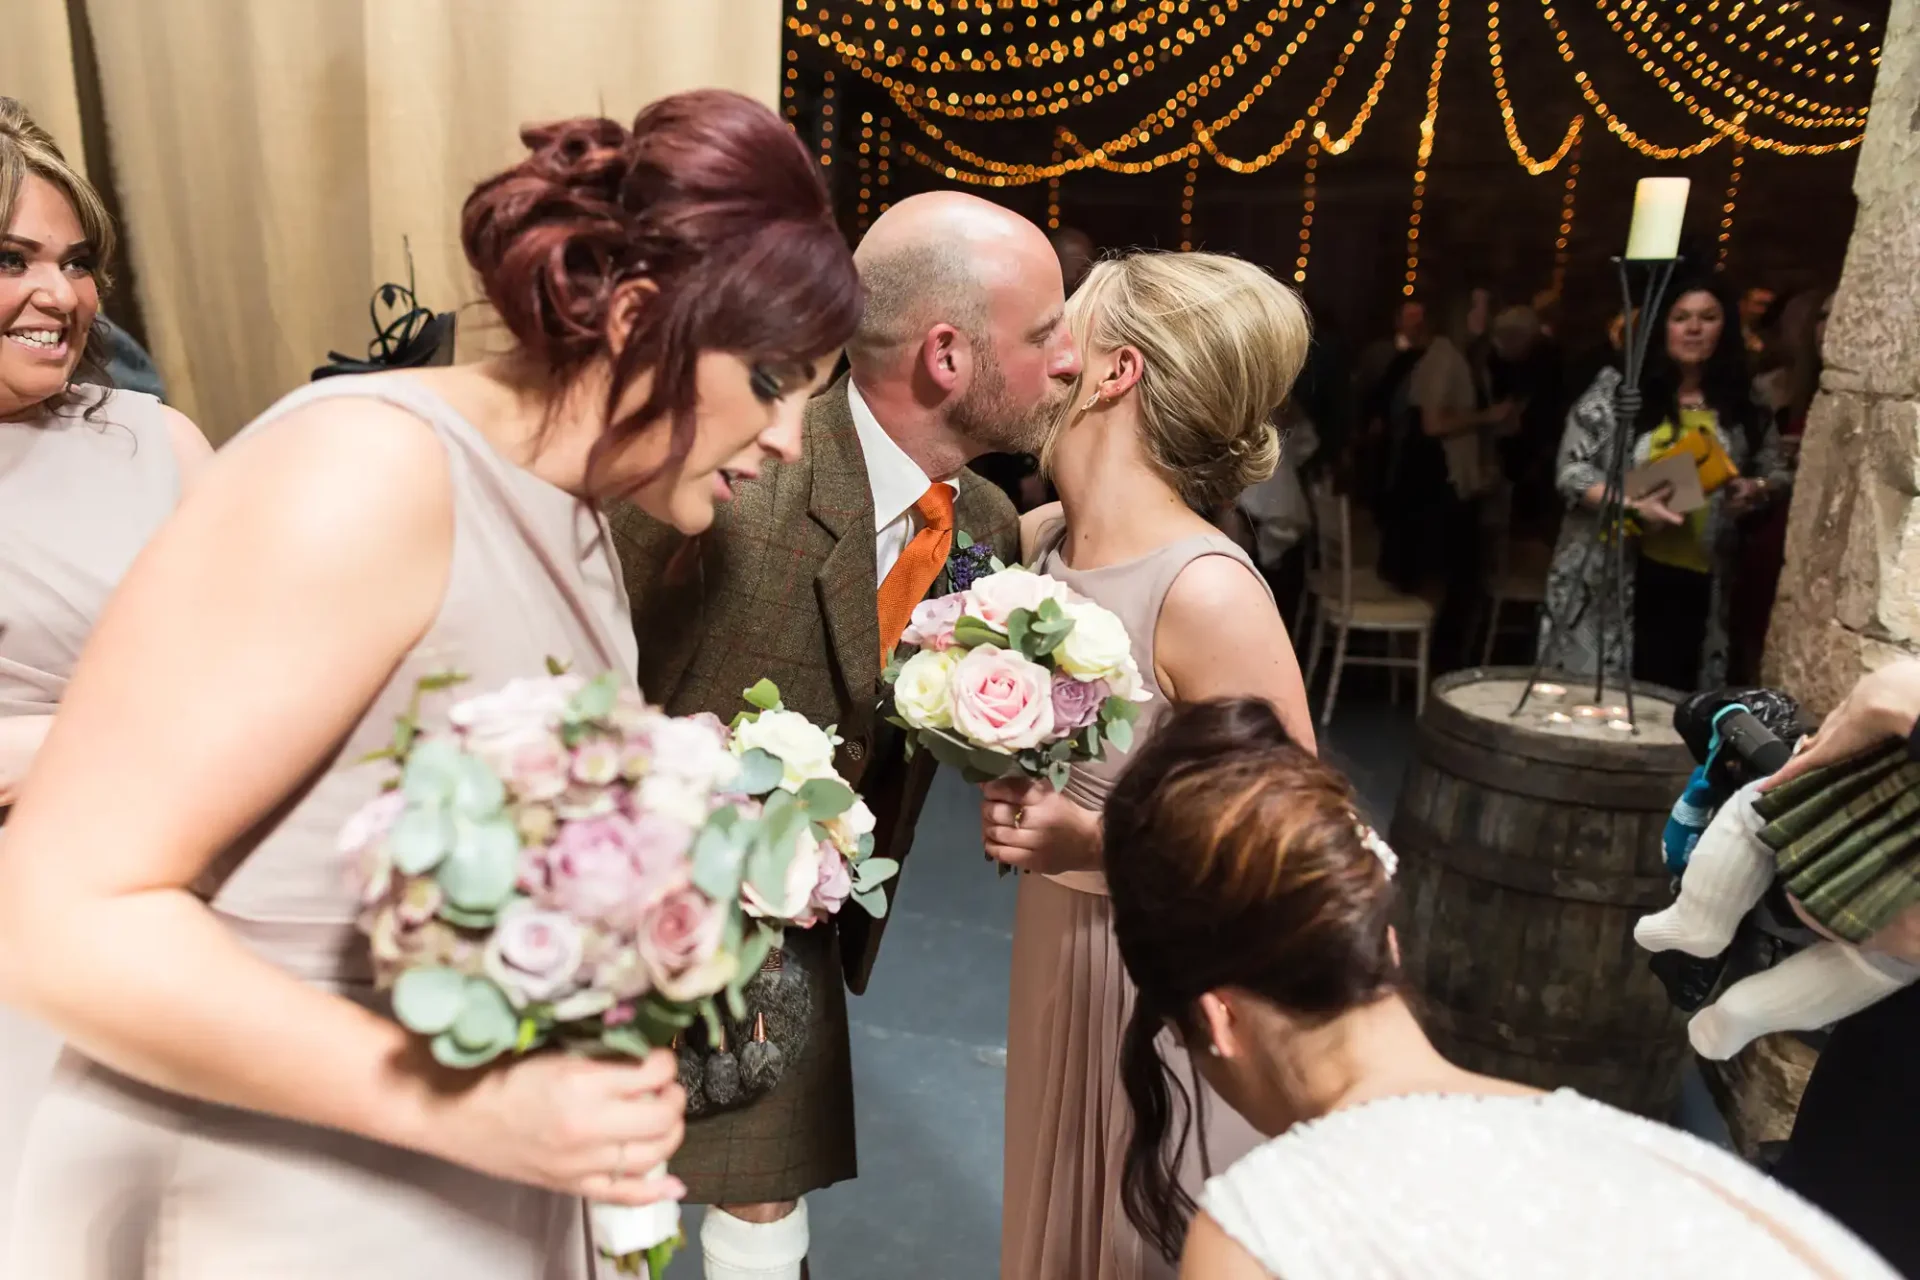 A bride and groom kiss while surrounded by bridesmaids at a warmly lit wedding venue with hanging string lights.